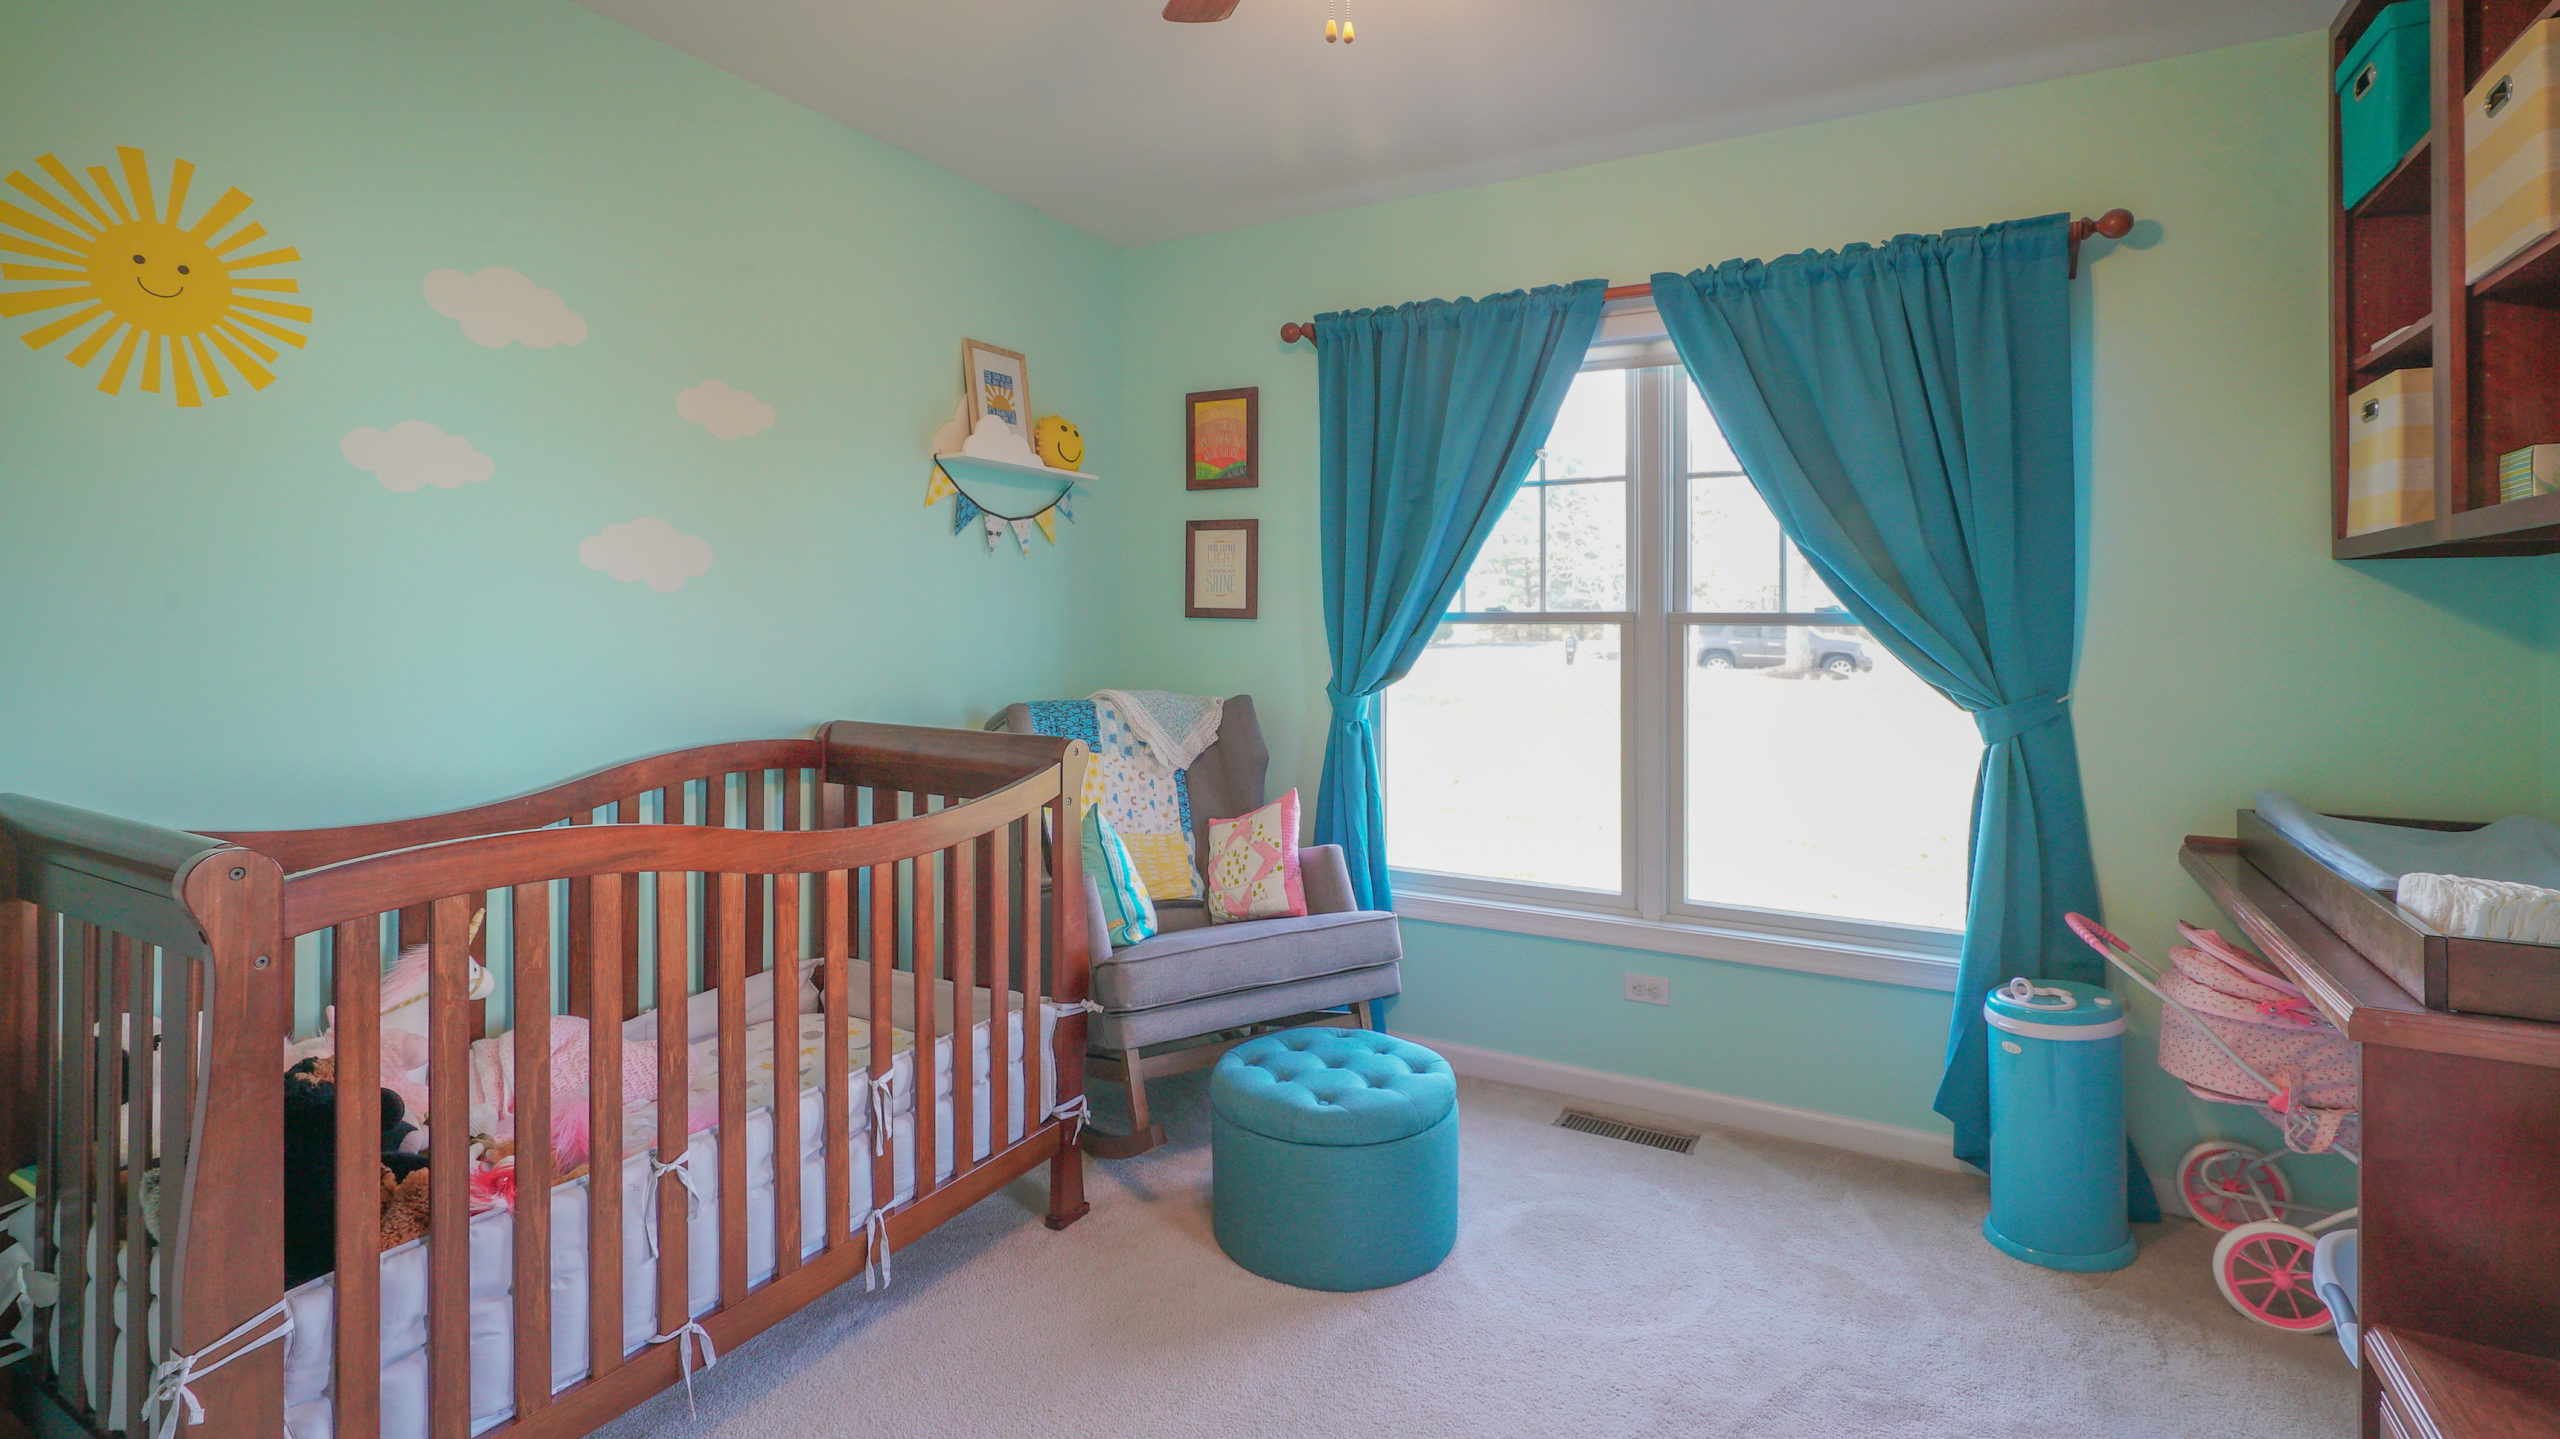 House for Sale in Chestertown Maryland View of Nursery